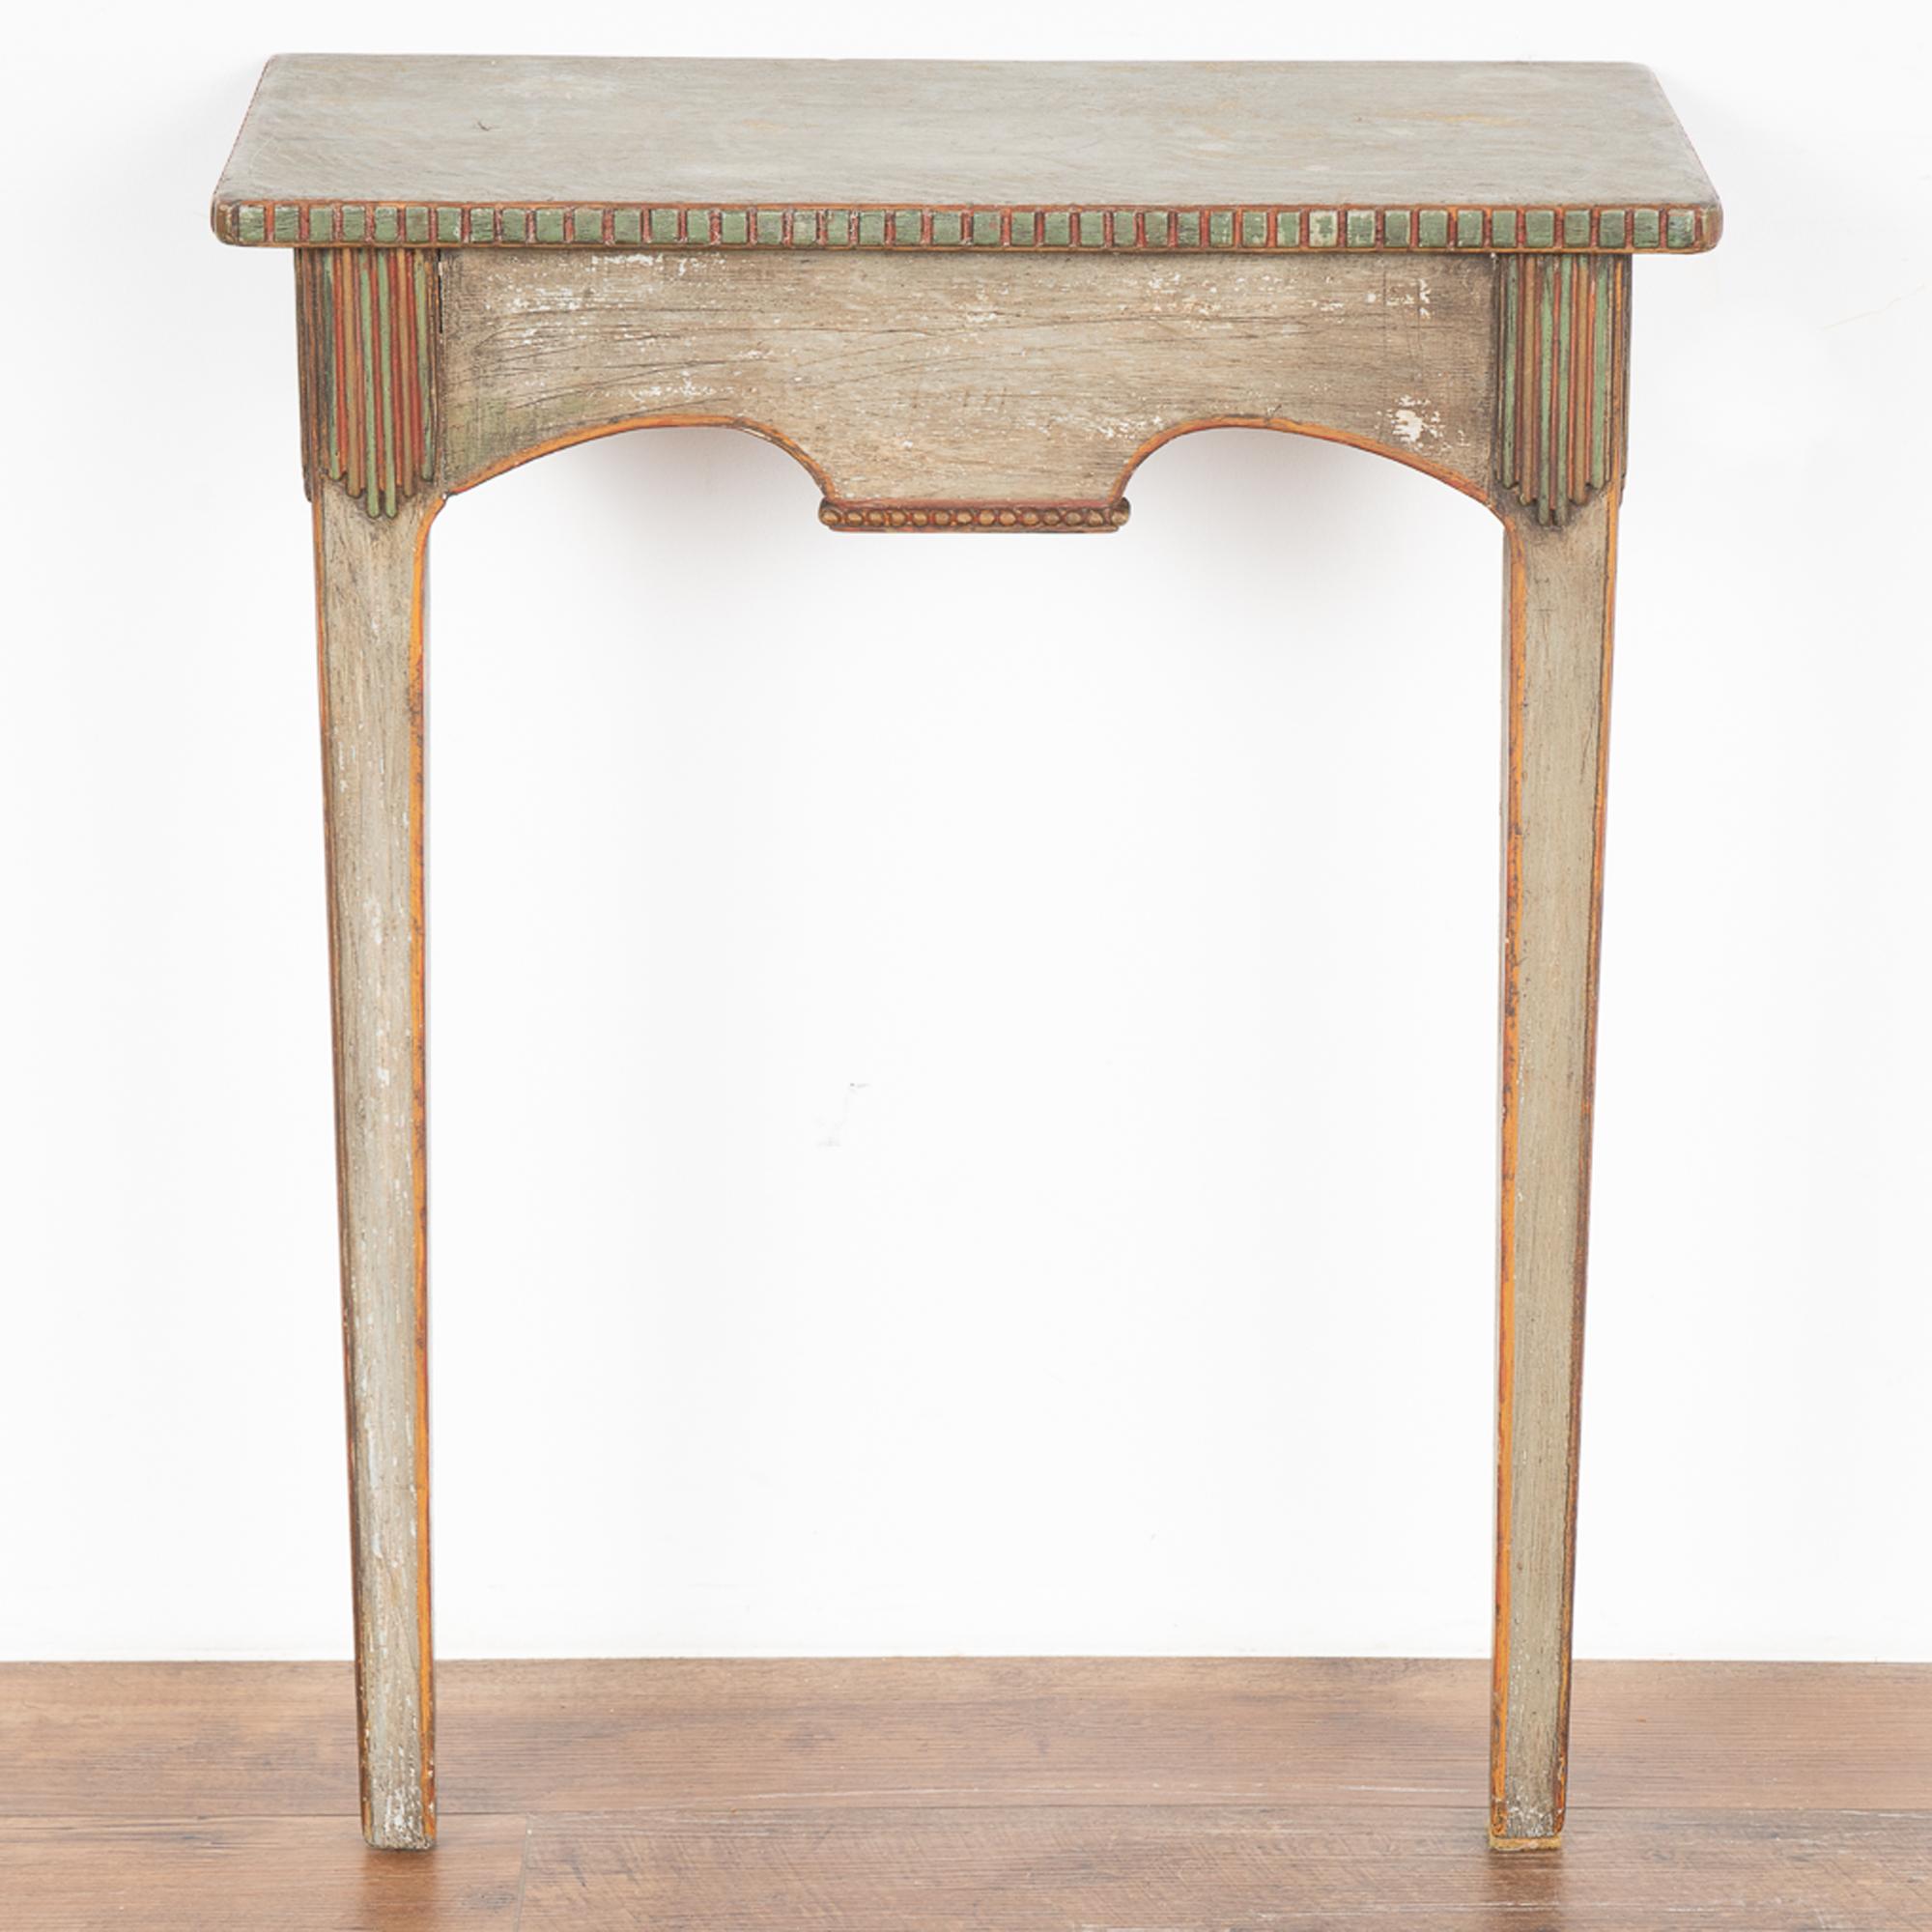 Small side table with tapered legs and dentil molding trim.
It is the beautifully layered gray painted finish with highlights in soft green and red that create the captivating appeal of this special accent table.
Restored, strong and stable it is